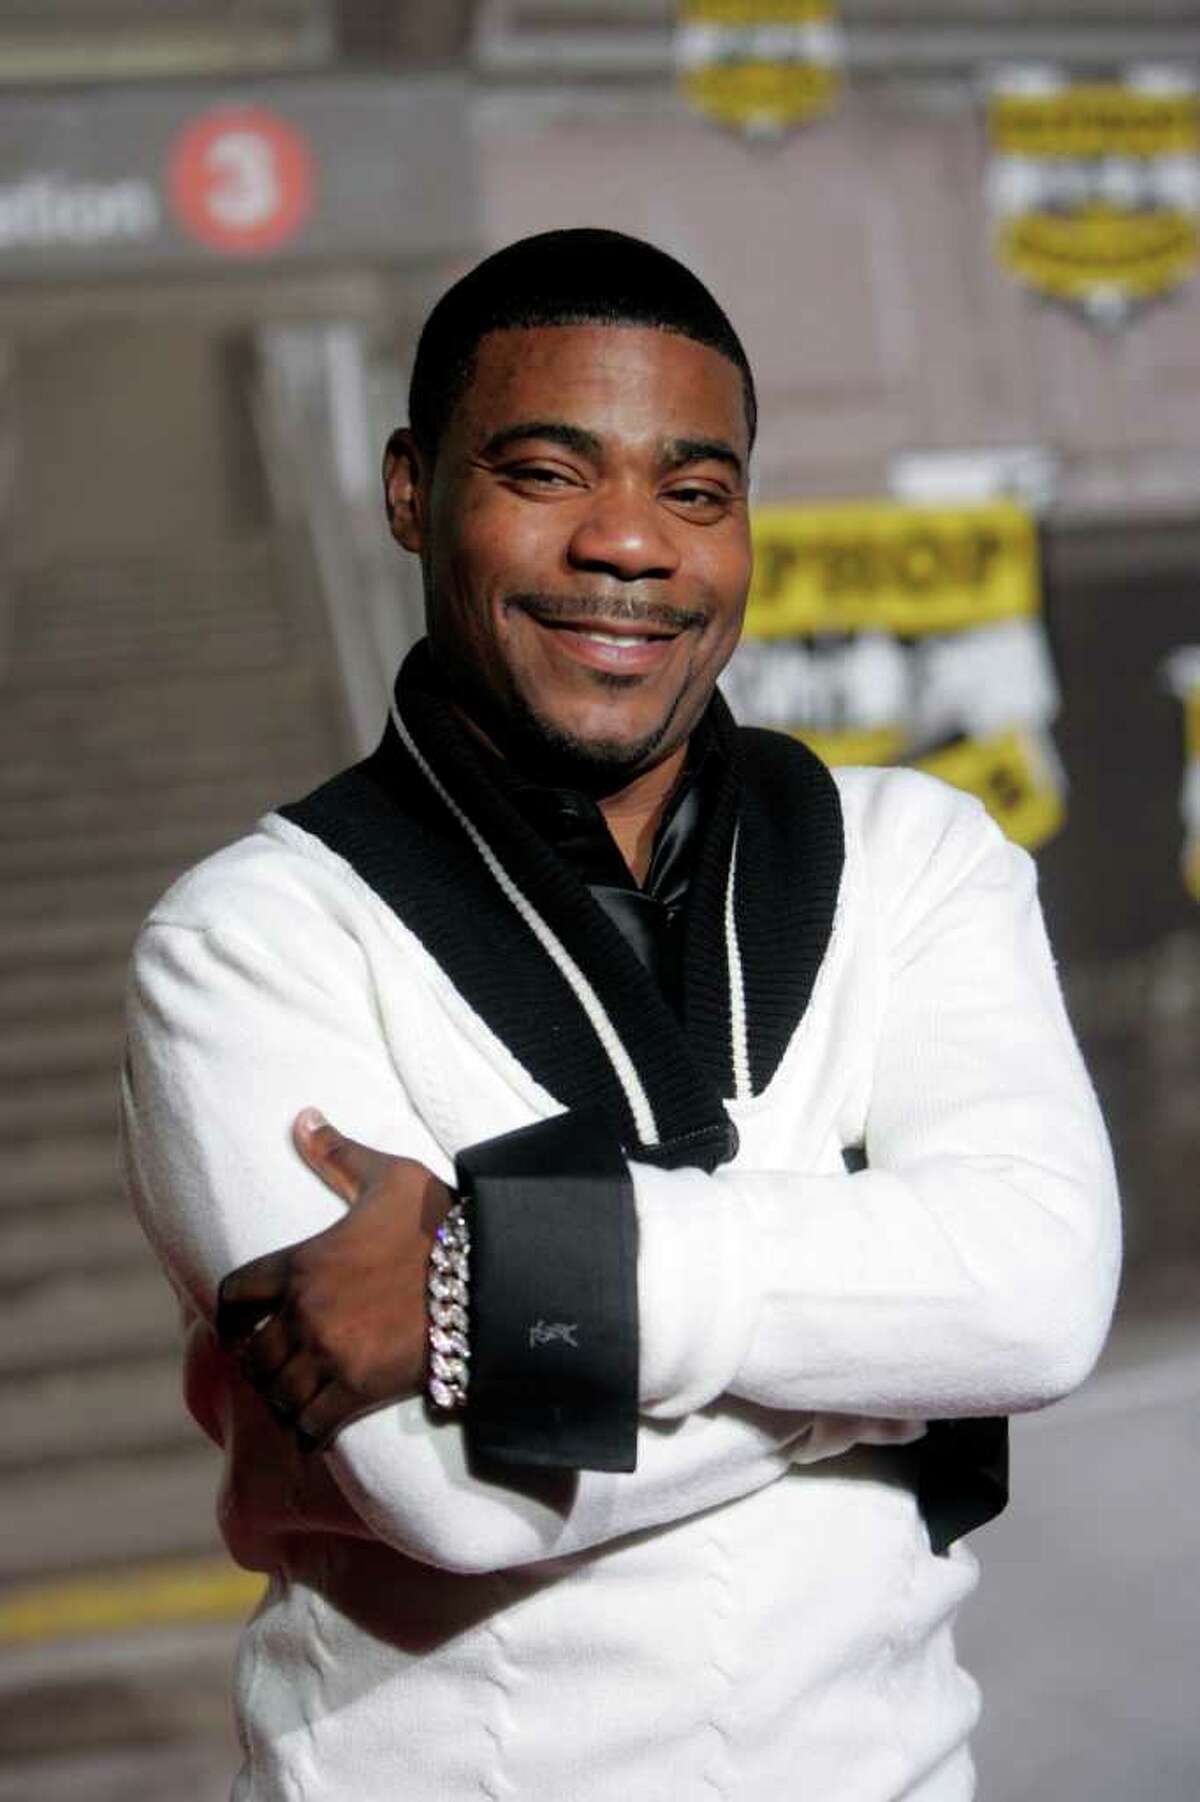 Comedian Tracy Morgan arrives at VH-1 Hip Hop Honors in this Oct. 7, 2006, file photo at the Hammerstein Ballroom in New York. (Gary He / Associated Press file)